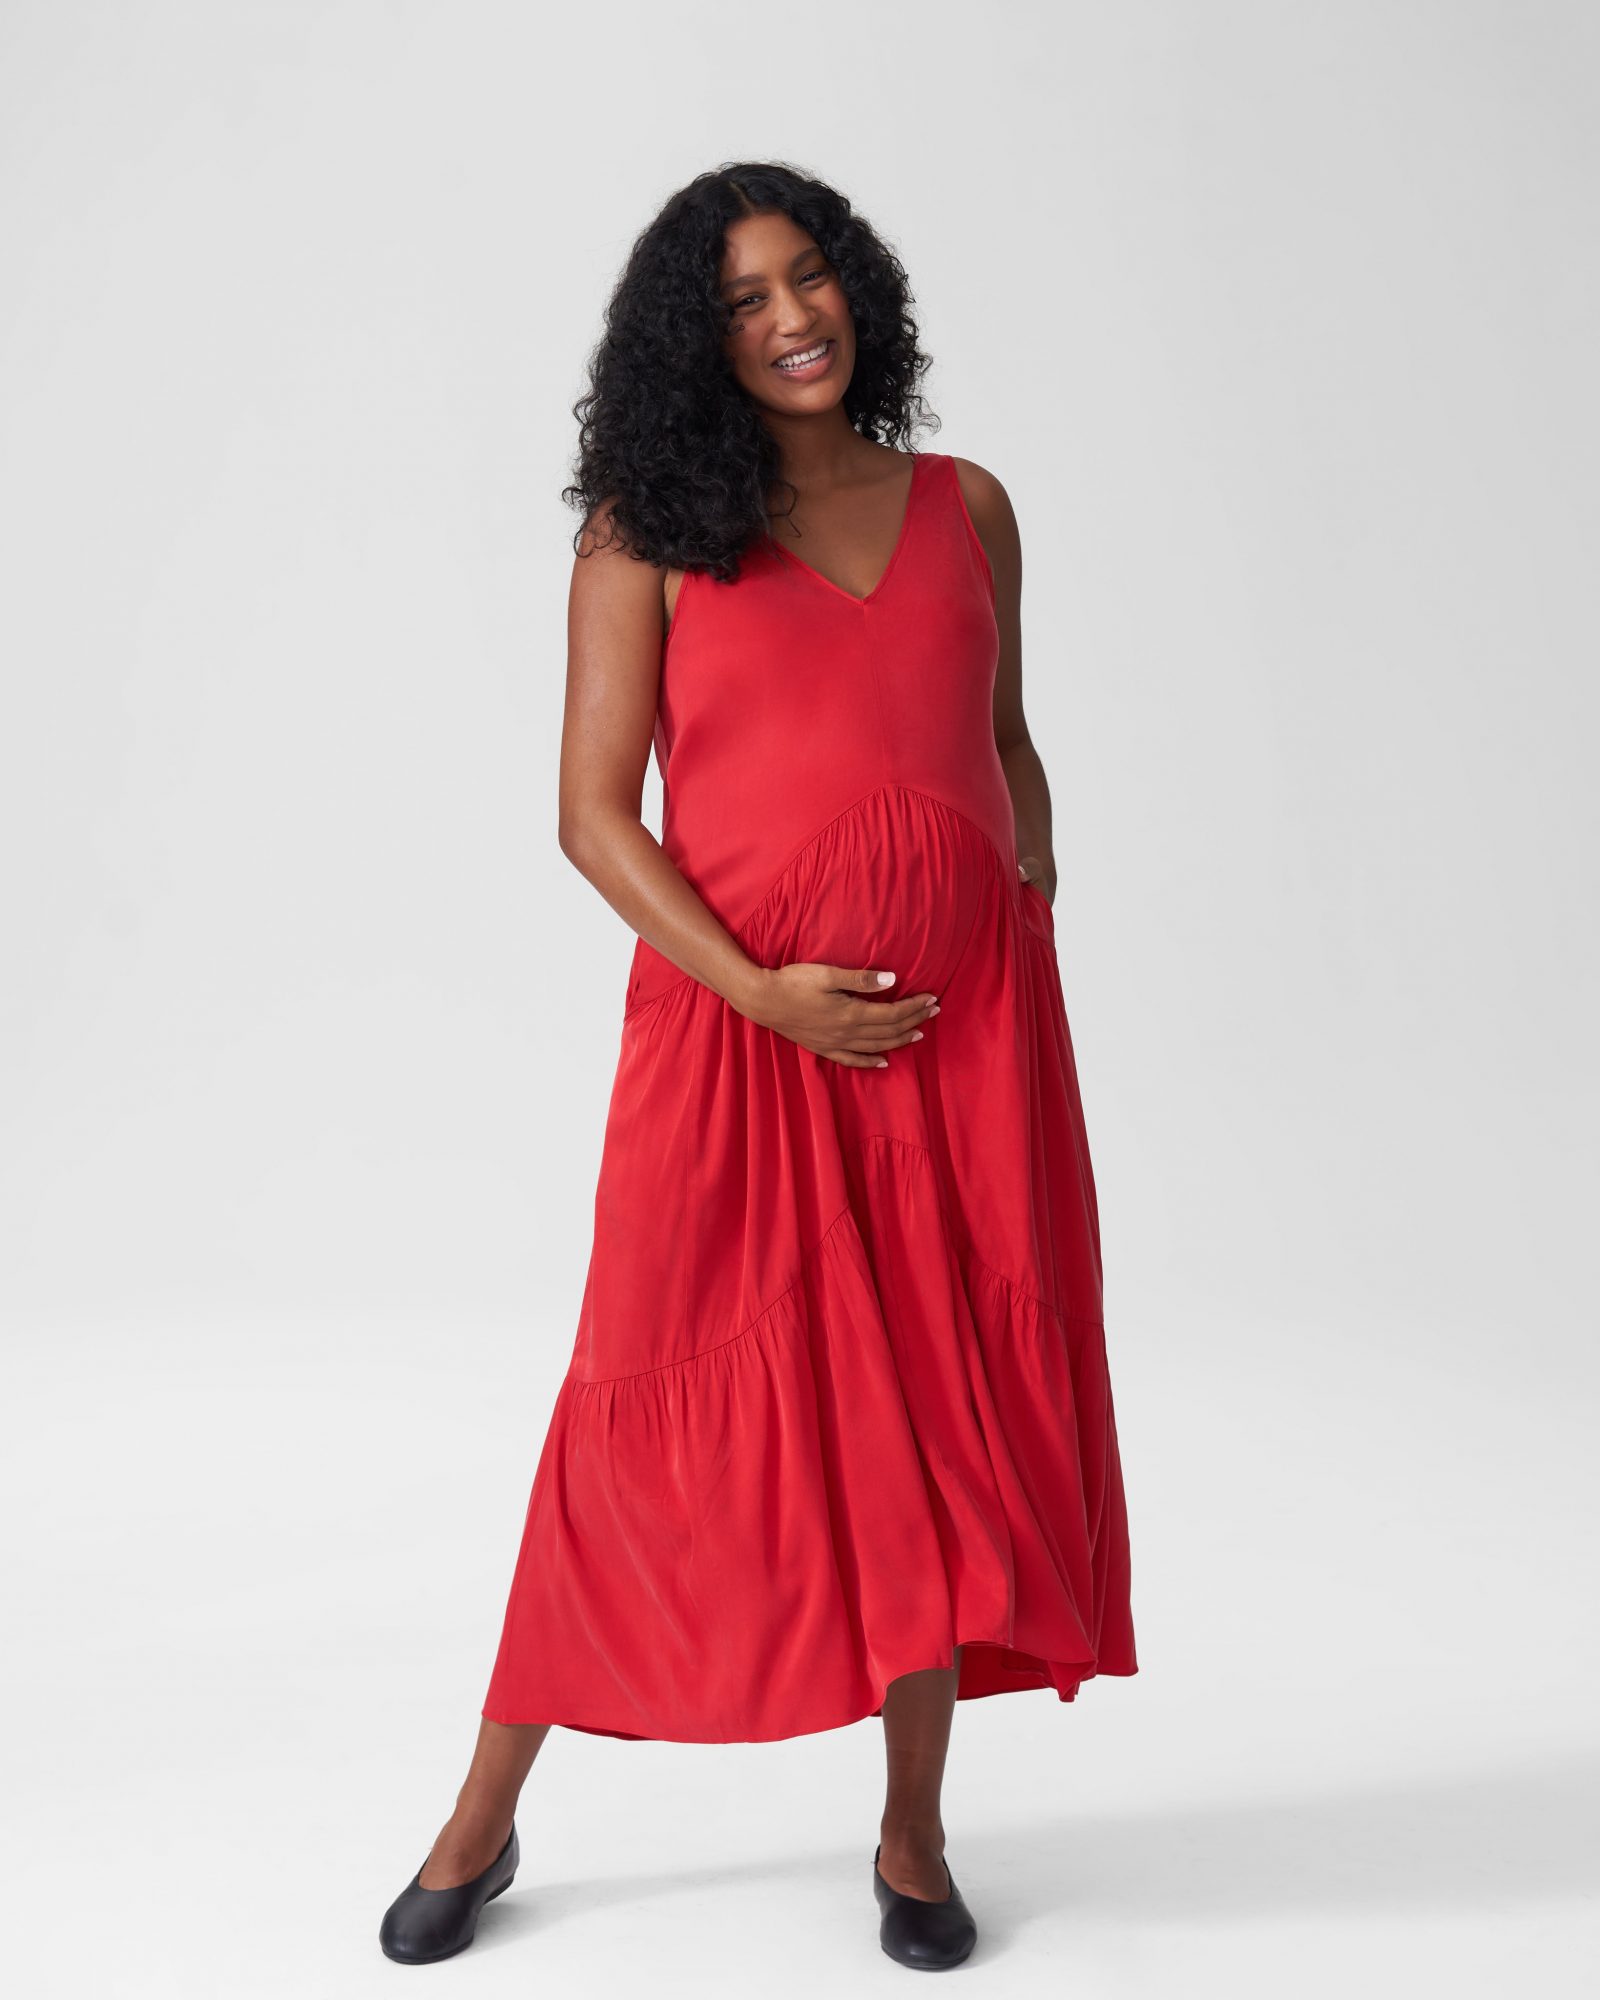 https://hellogiggles.com/wp-content/uploads/sites/7/2019/10/30/emily-cupro-maxi_red-2000.jpg?quality=82&strip=all